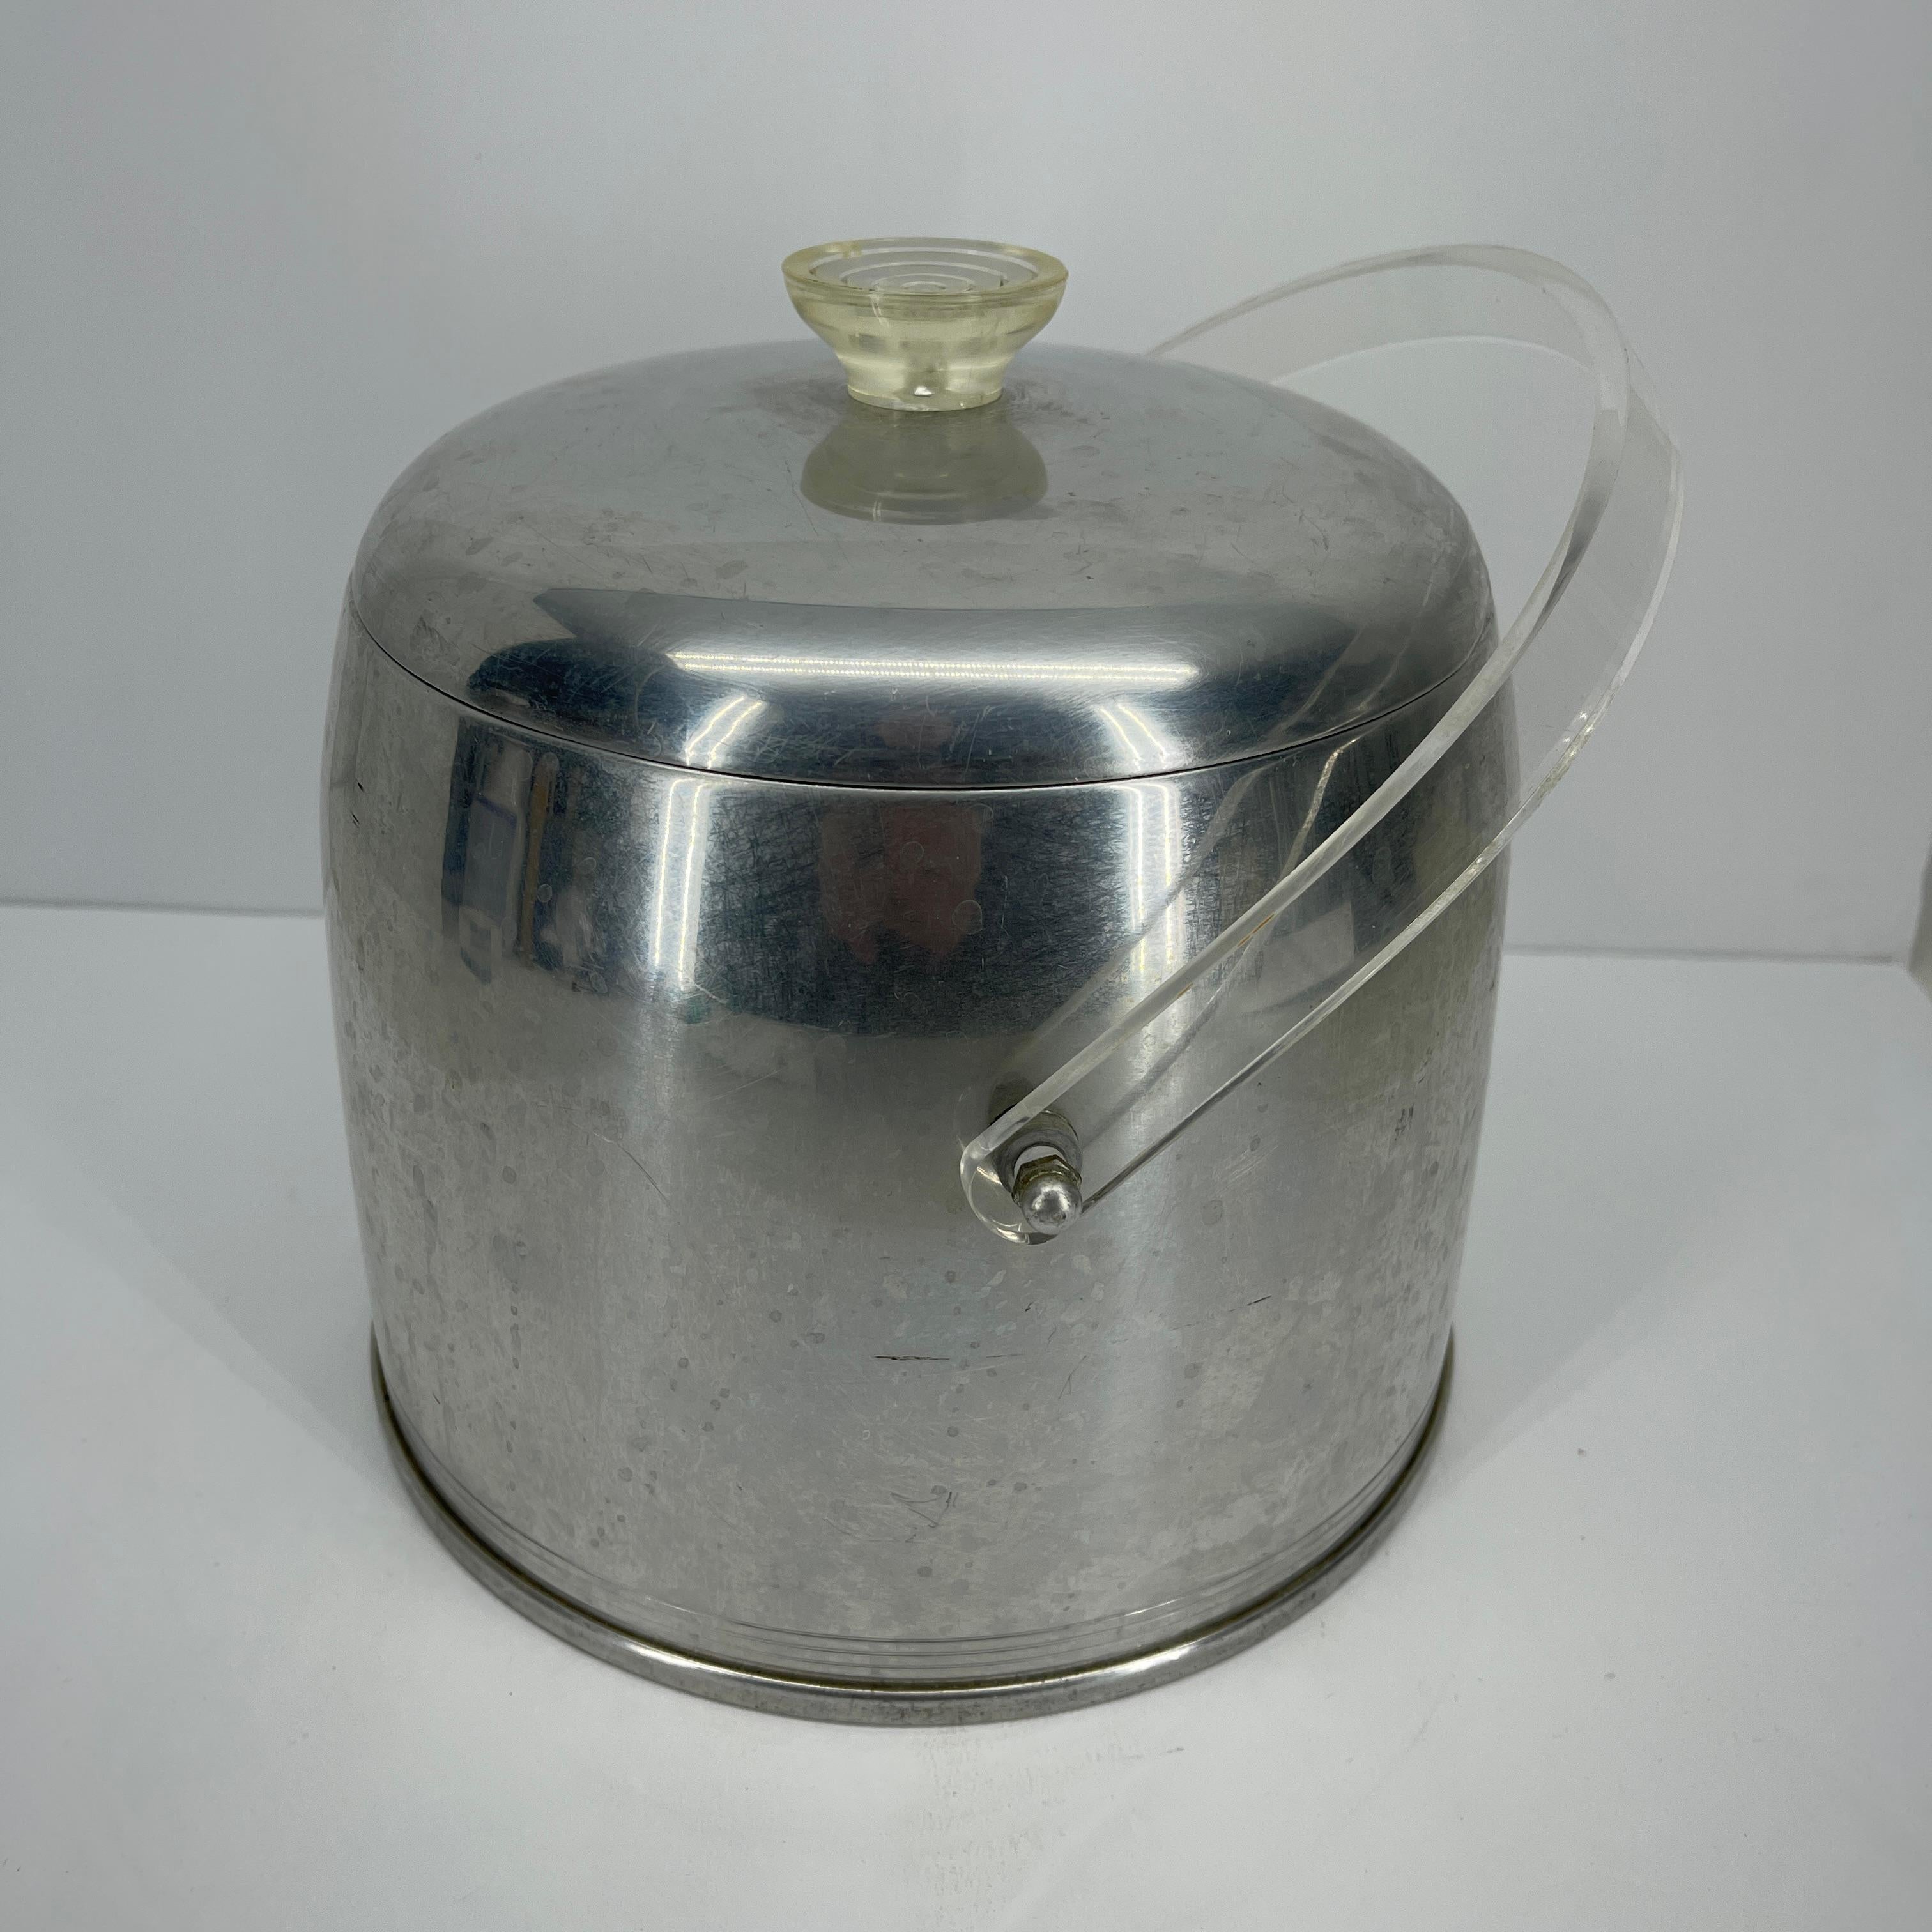 1950's aluminum ice bucket with lucite handle and finial.